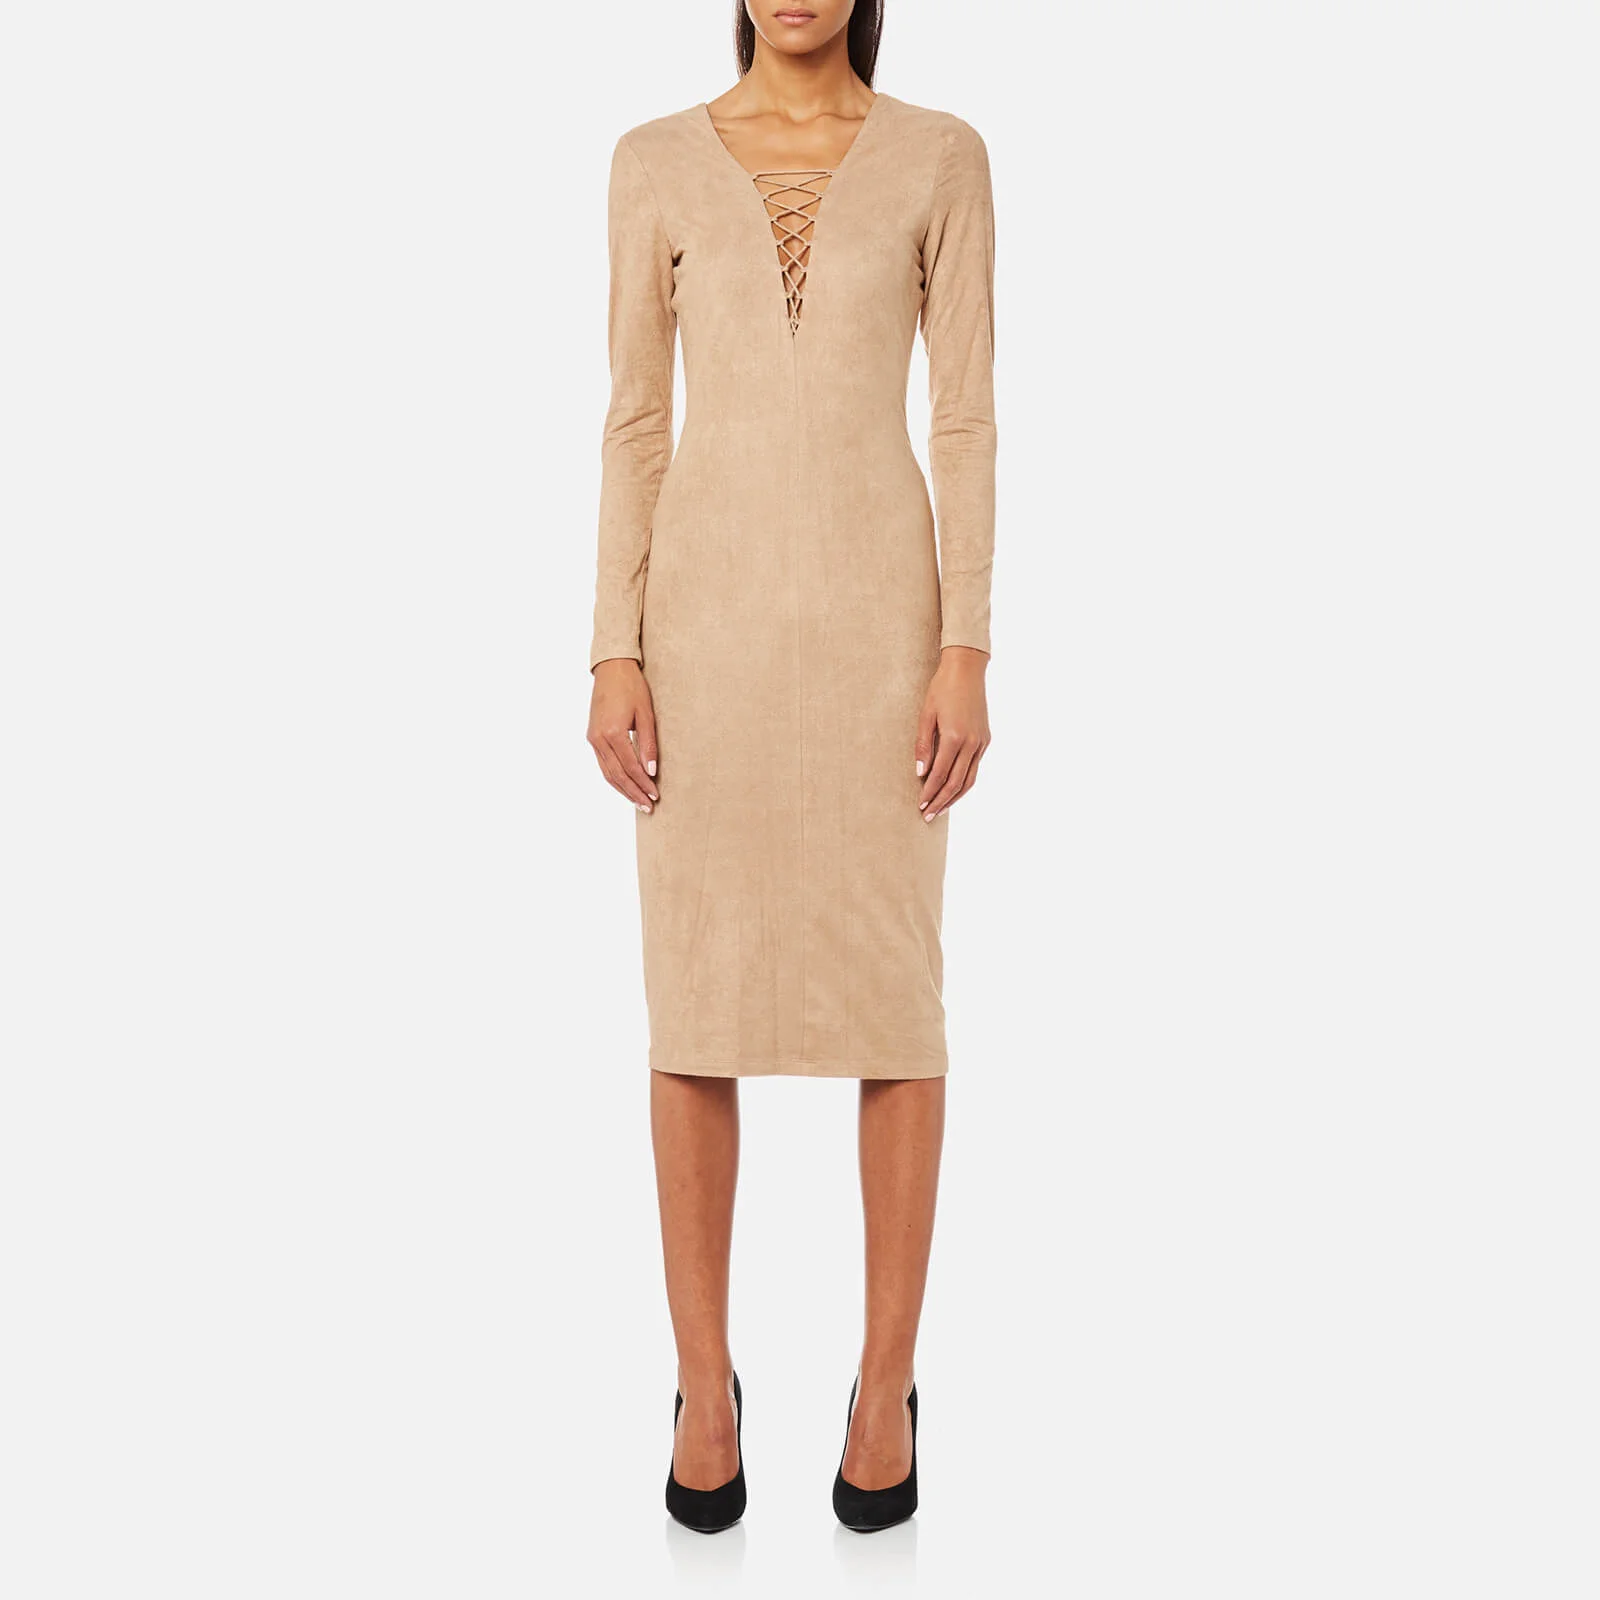 T by Alexander Wang Women's Stretch Faux Suede Lace Up Midi Dress - Camel Image 1